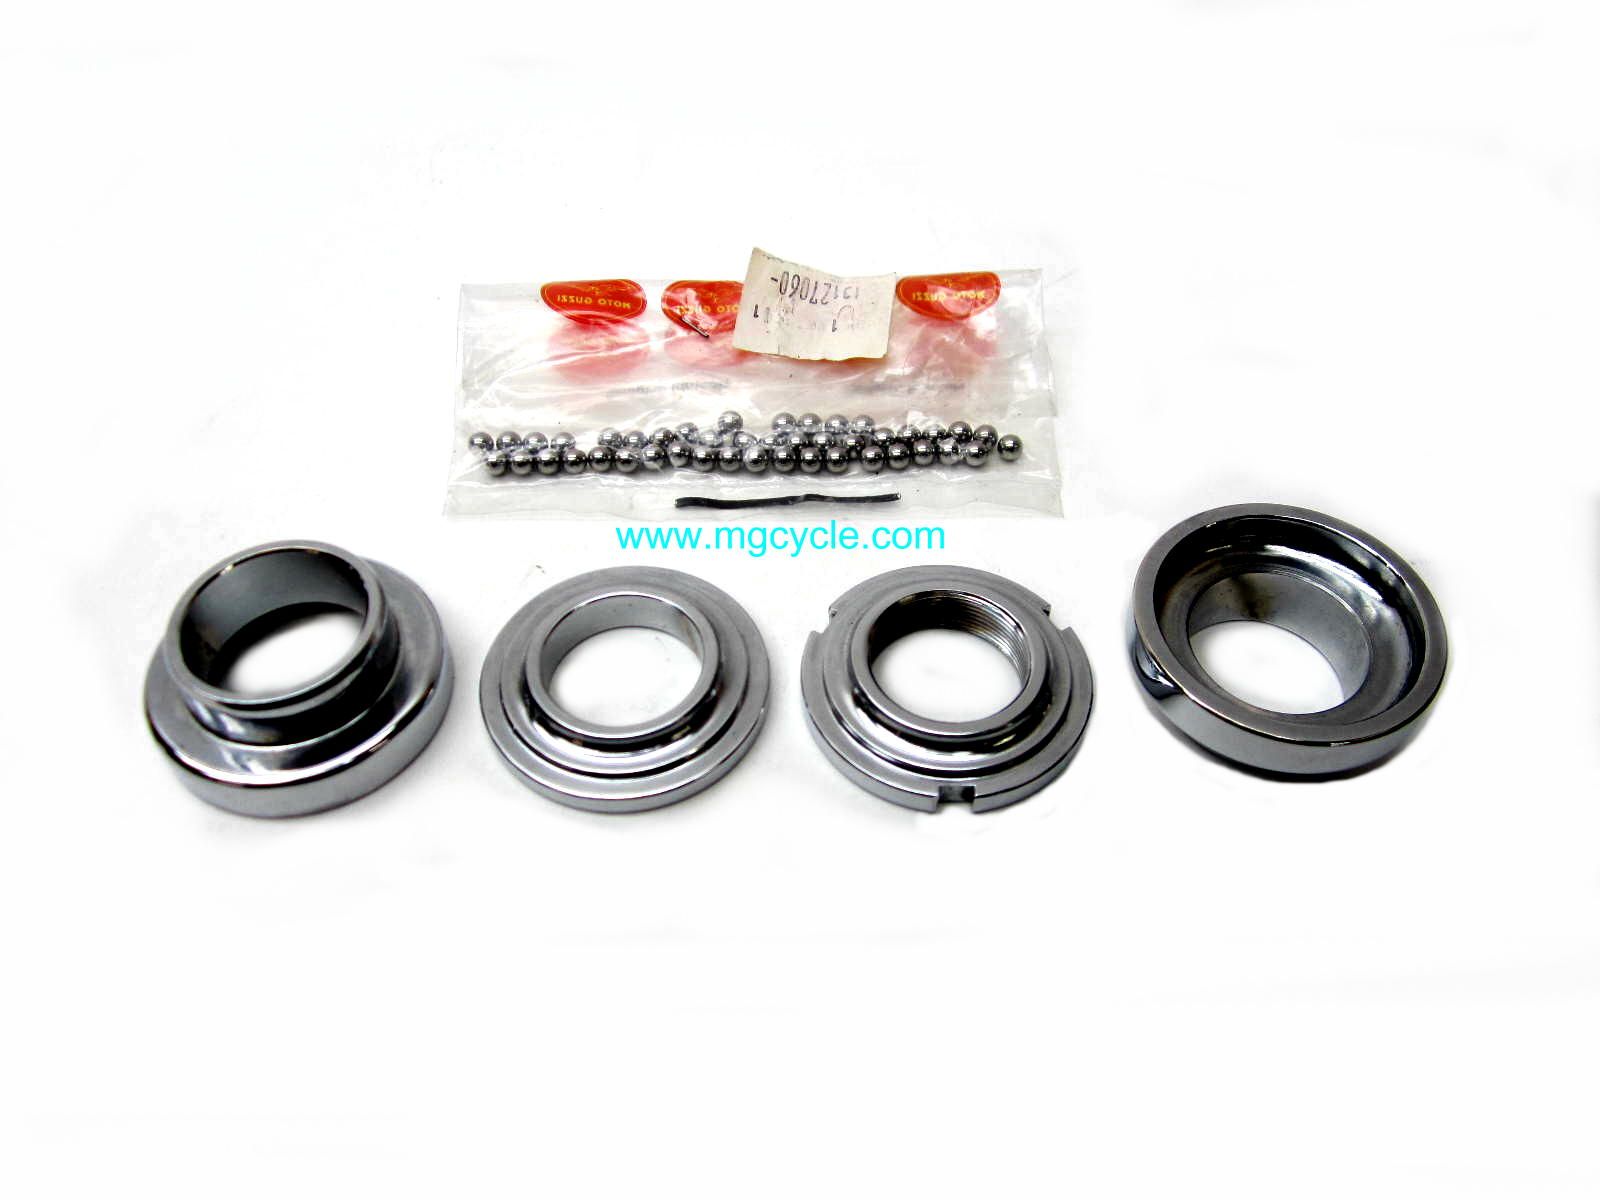 Steering head bearing kit with balls and races V50 V65